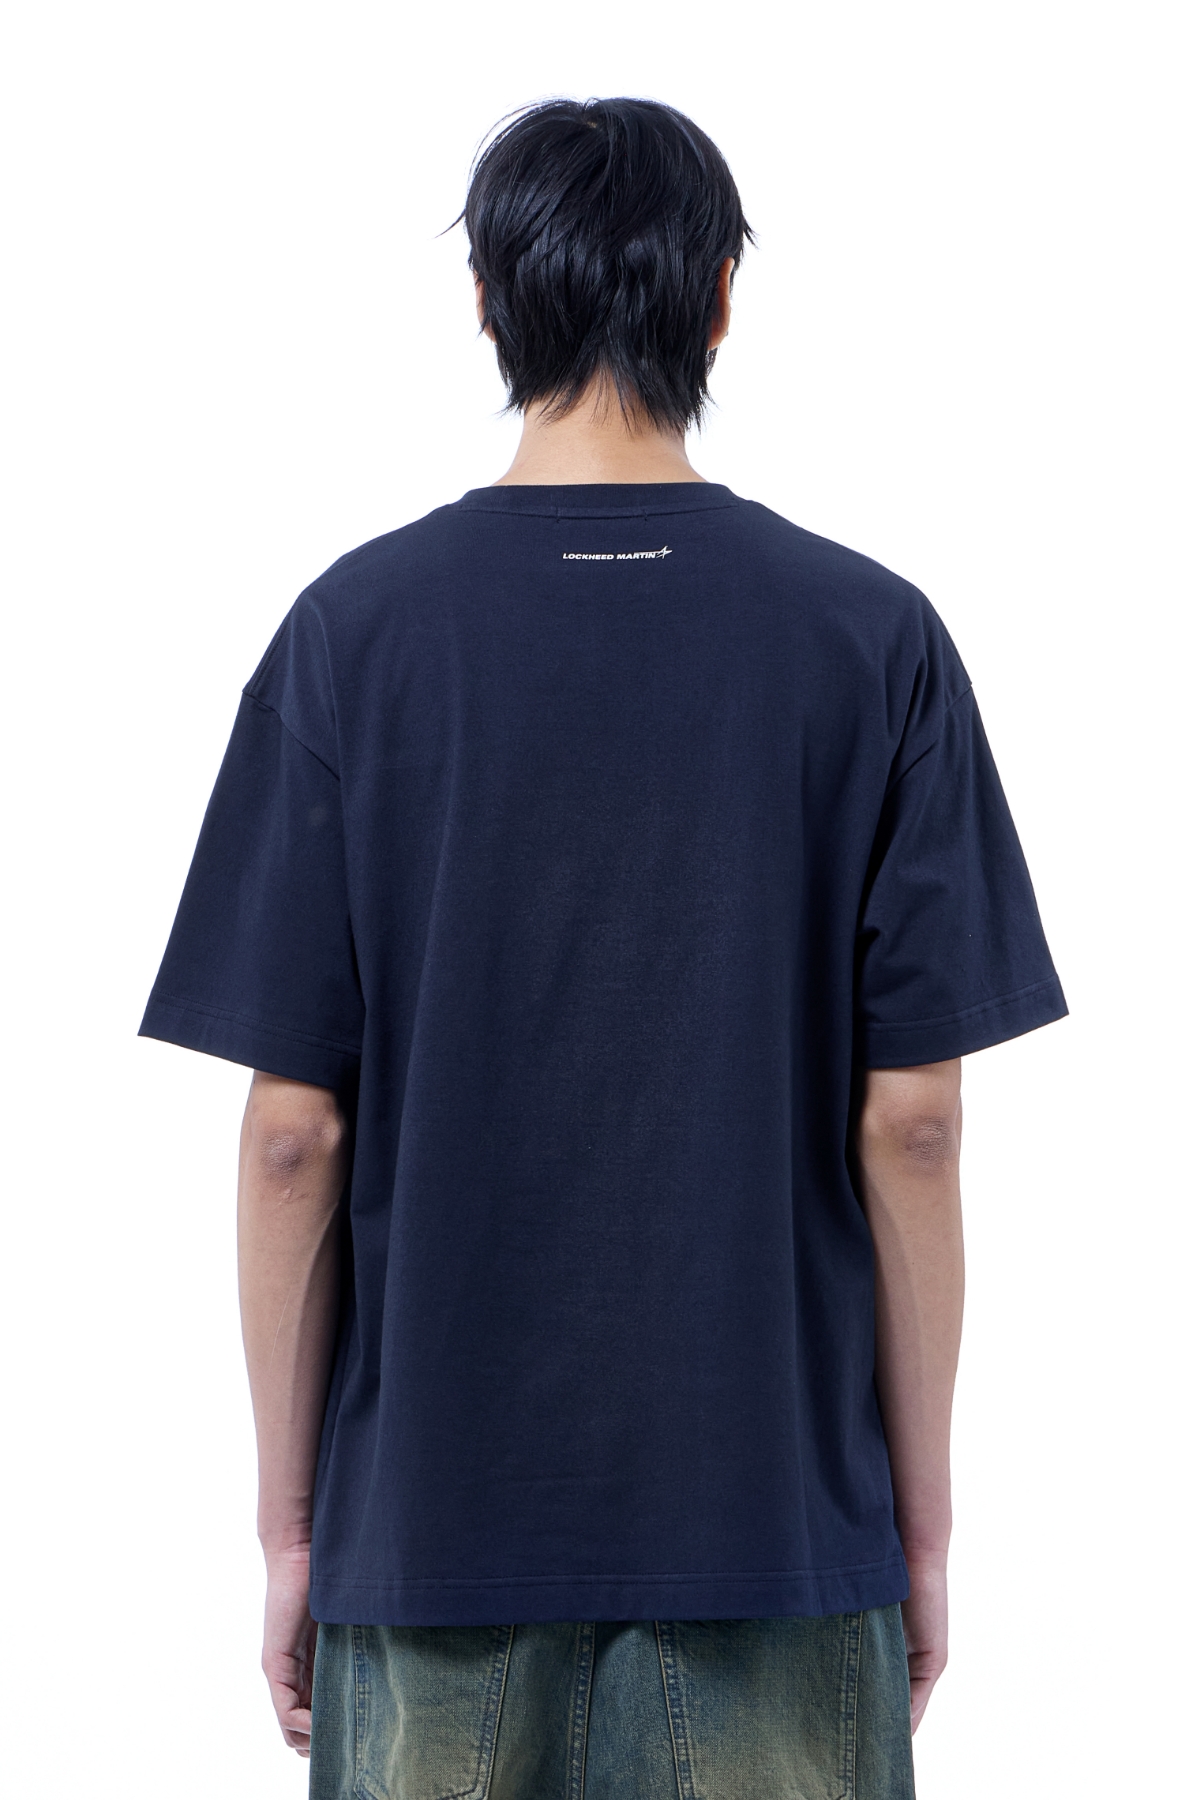 LM F-35 ARCH GRAPHIC T-SHIRT (NAVY)